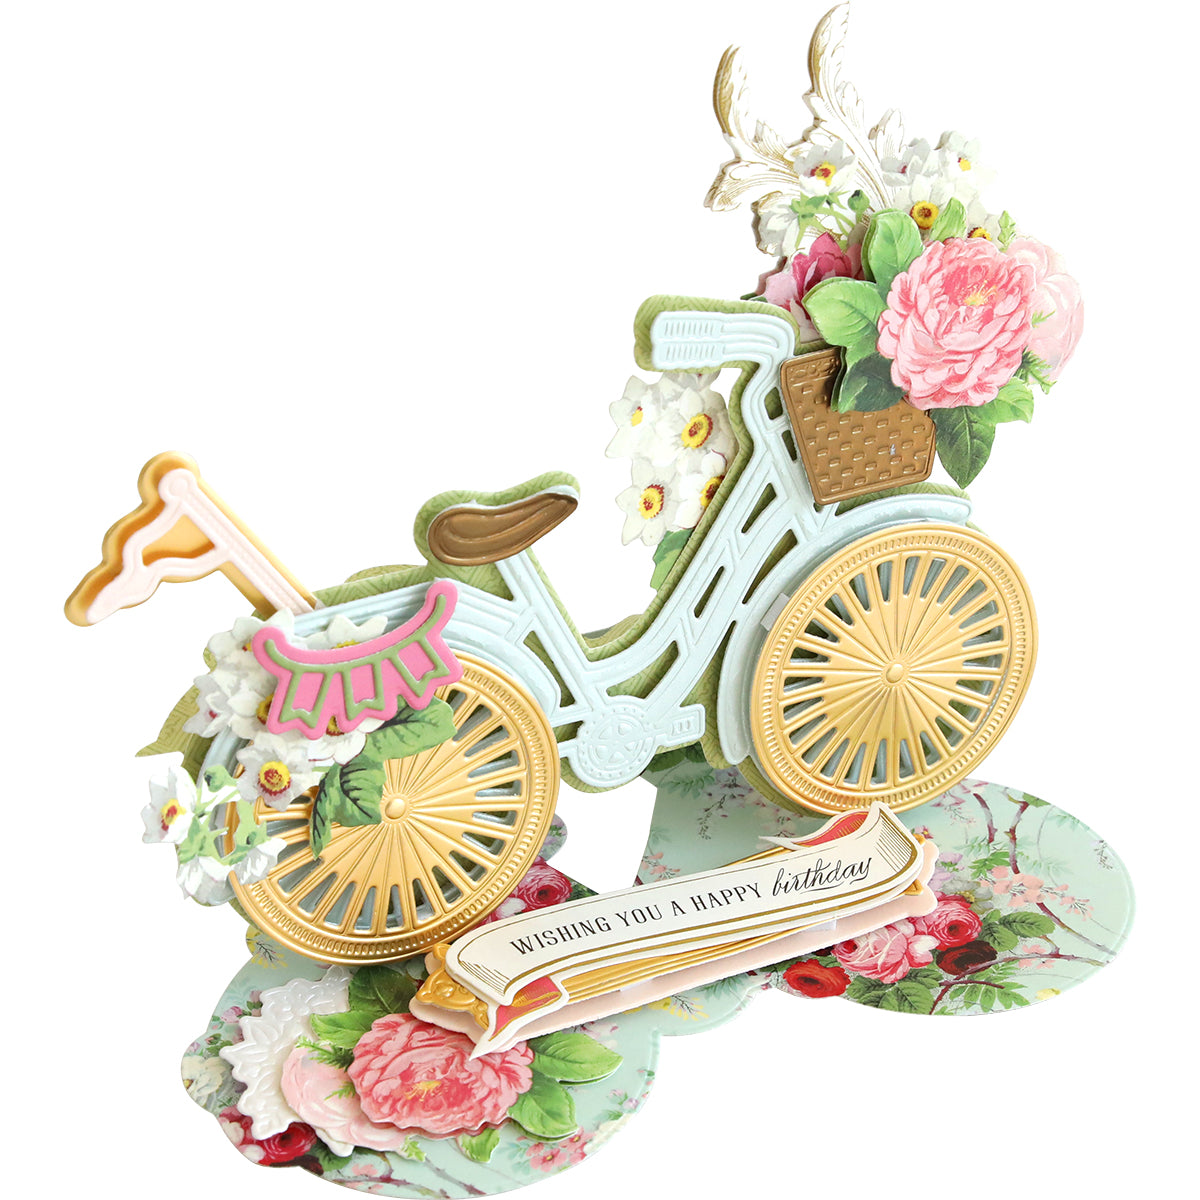 A decorative 3D Bicycle Easel Die featuring a pastel-colored bicycle with a basket of flowers and the message "wishing you a happy birthday!" printed on an easel die set base that resembles floral plates.